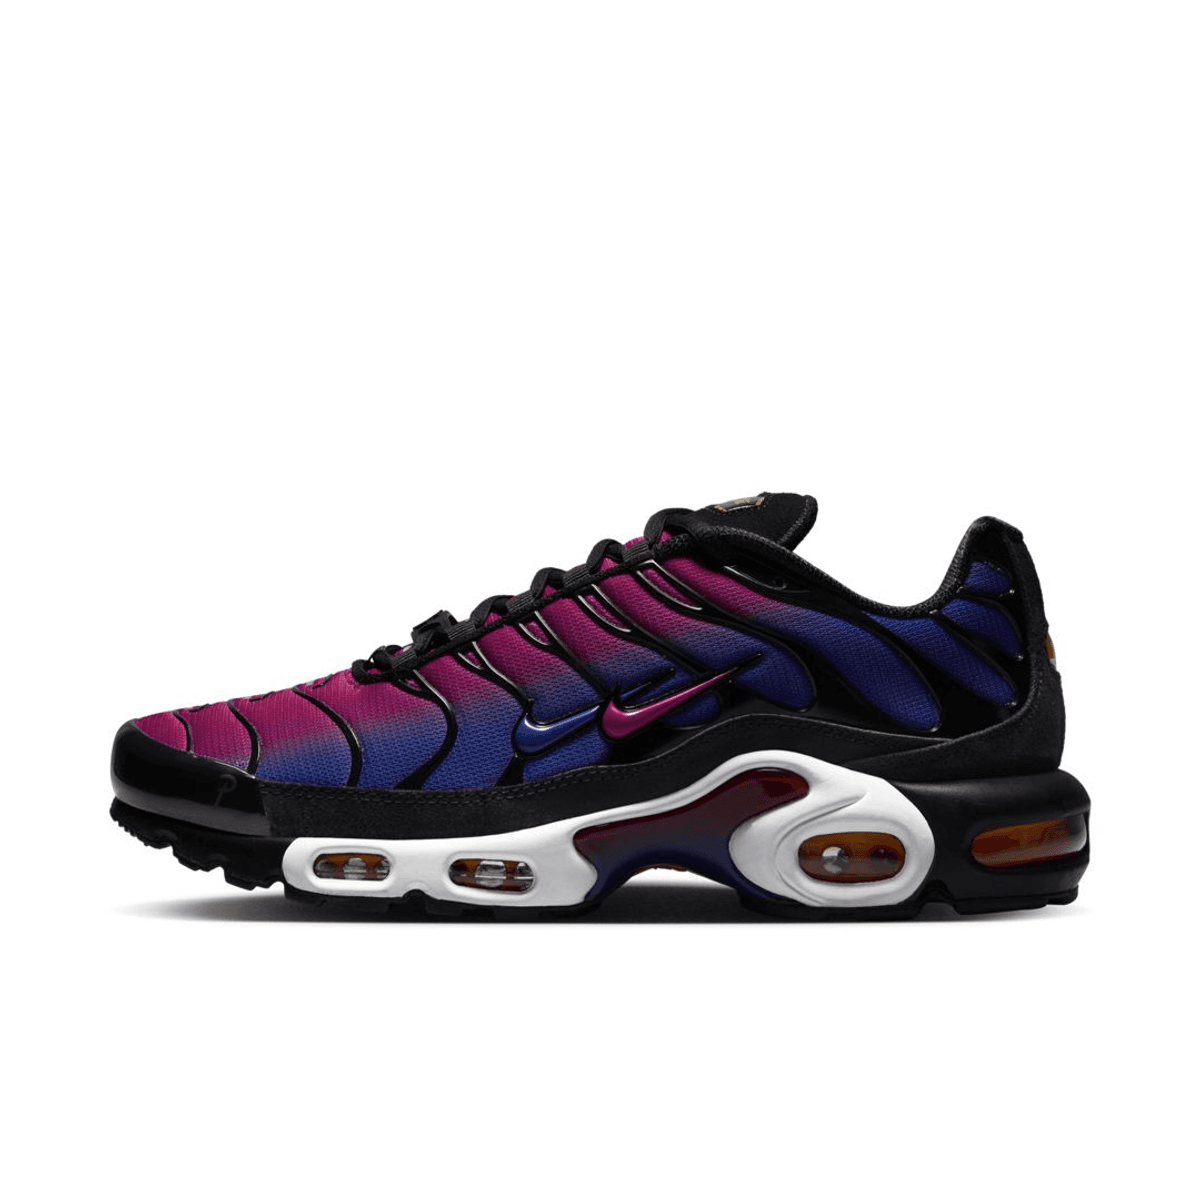 The Patta x Nike Air Max Plus "FC Barcelona" Releases This Holiday Season